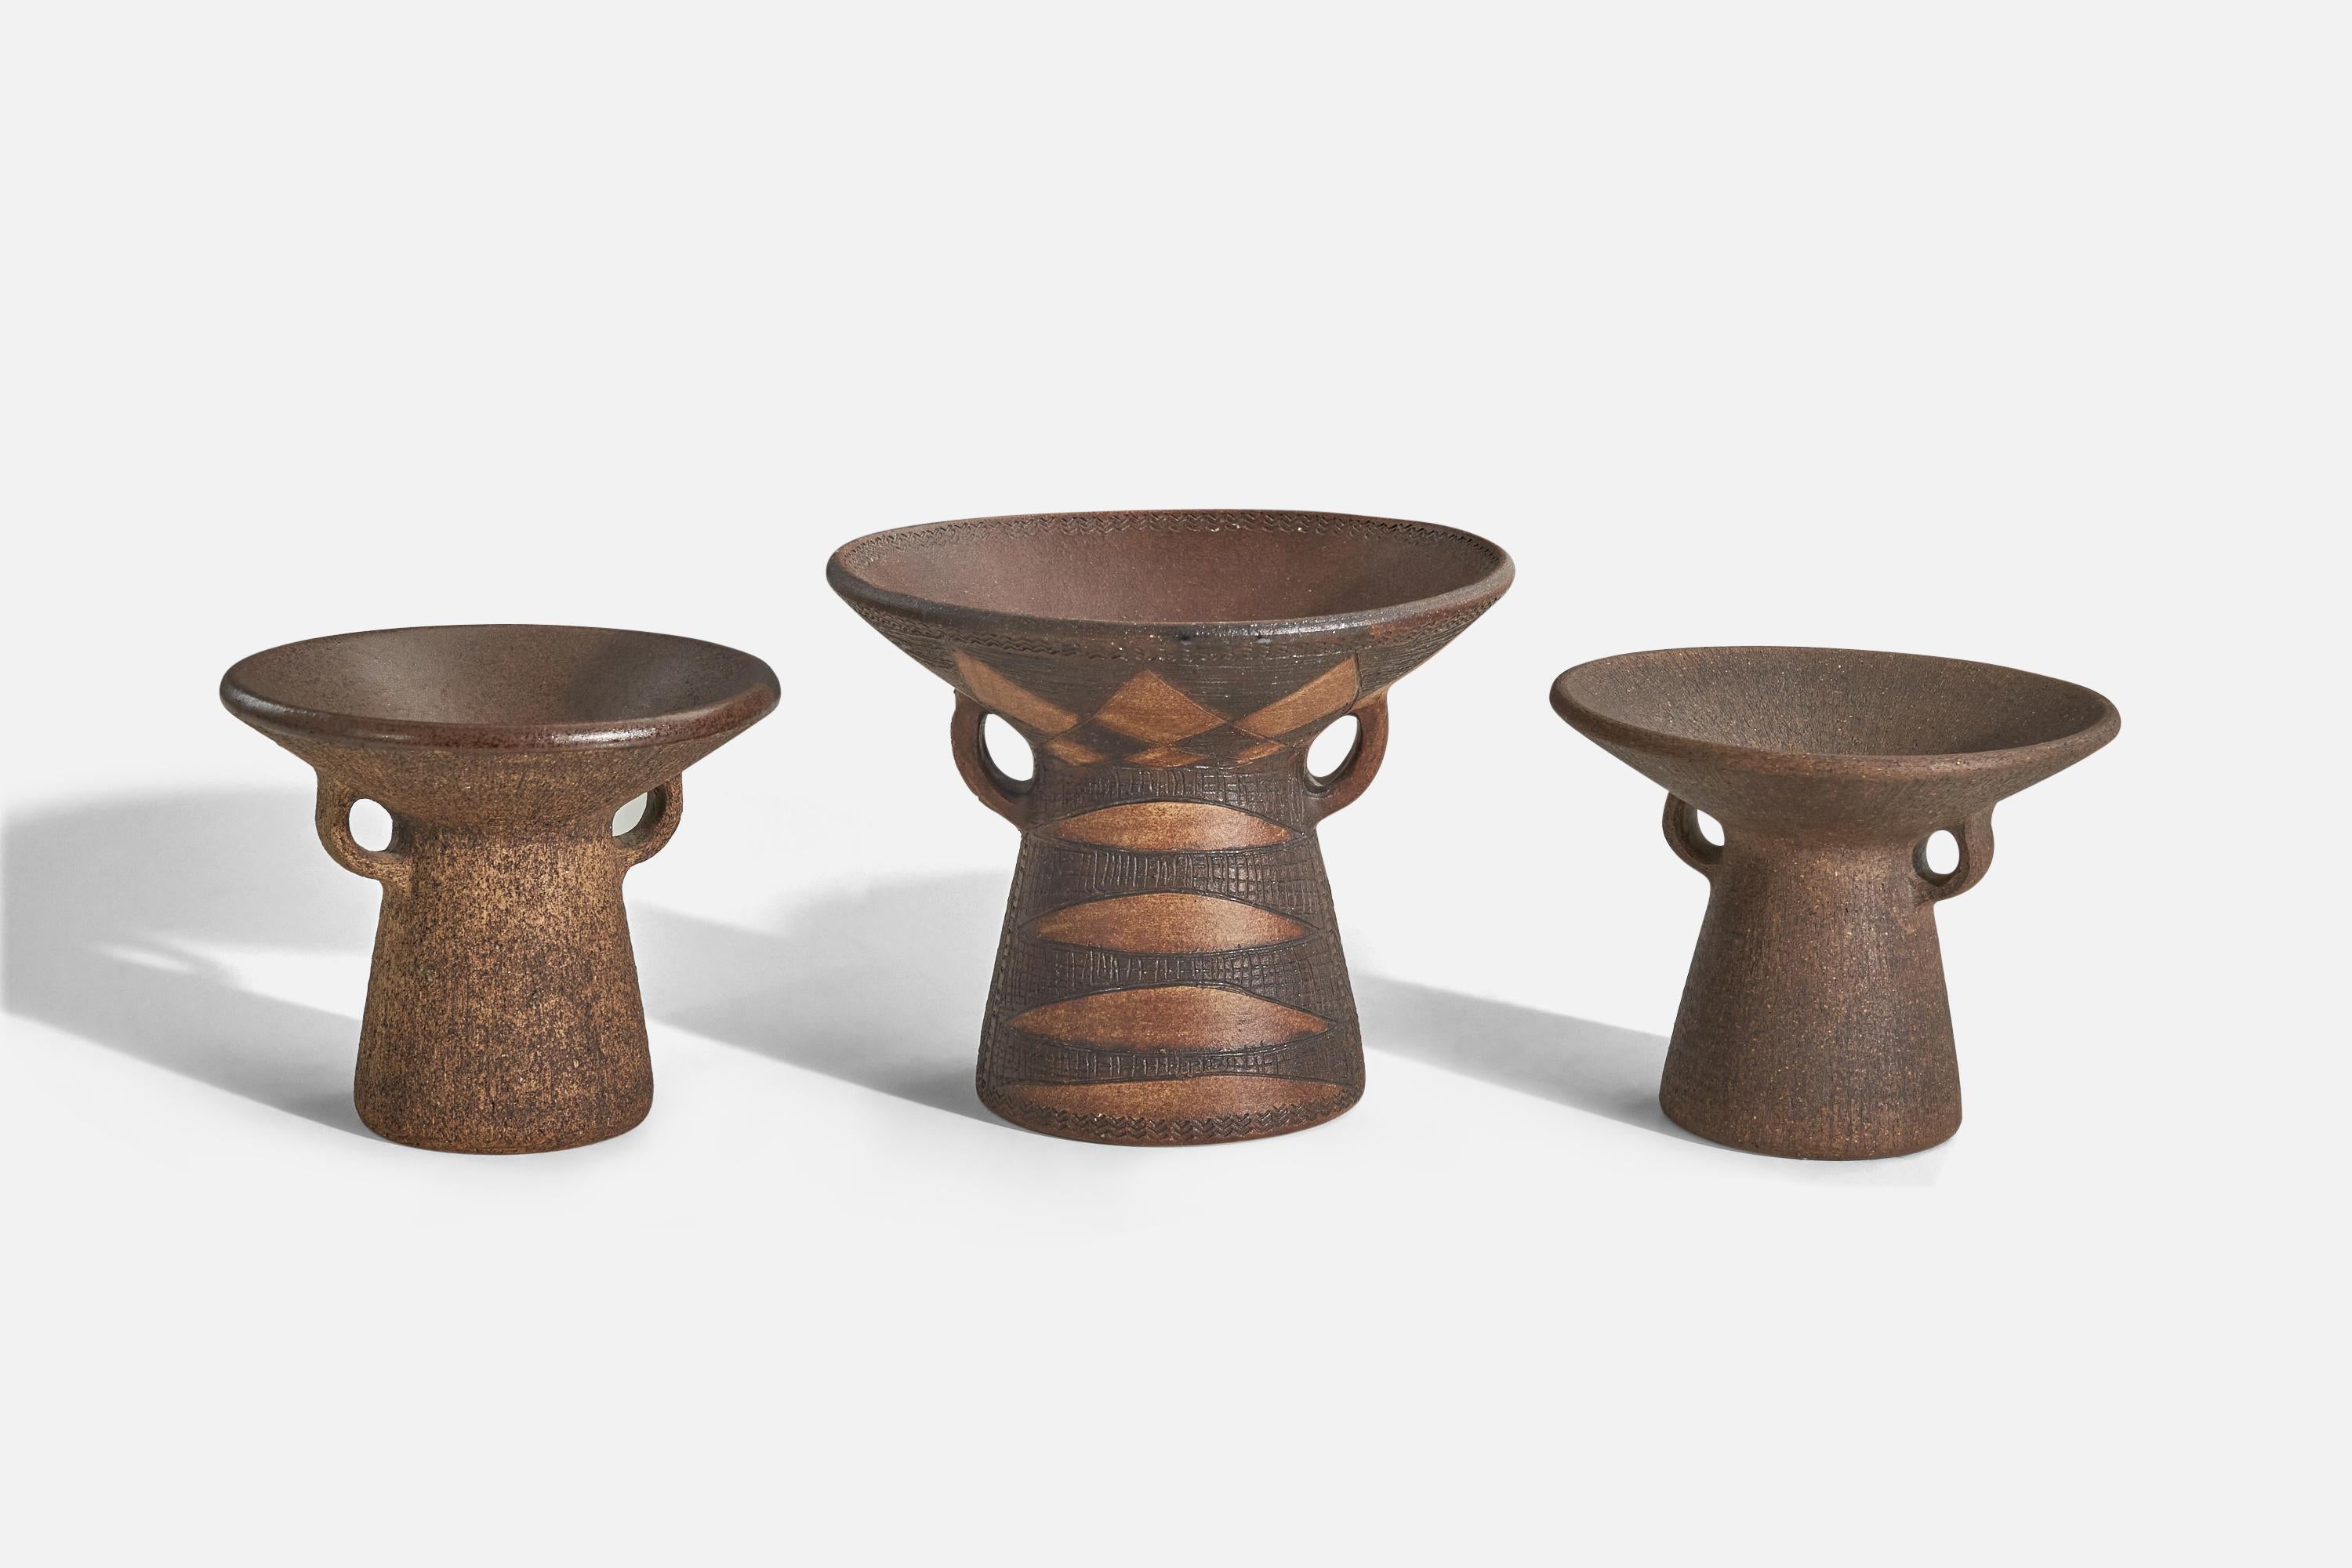 A set of three brown-glazed stoneware vases designed by Nils Allan Johannesson and produced by his studio in Barsebäck, Sweden, c. 1960s.

Stated dimensions refer to the largest vase.
Dimensions of the smallest vases (inches): 4.56 x 5.62 x 5.62